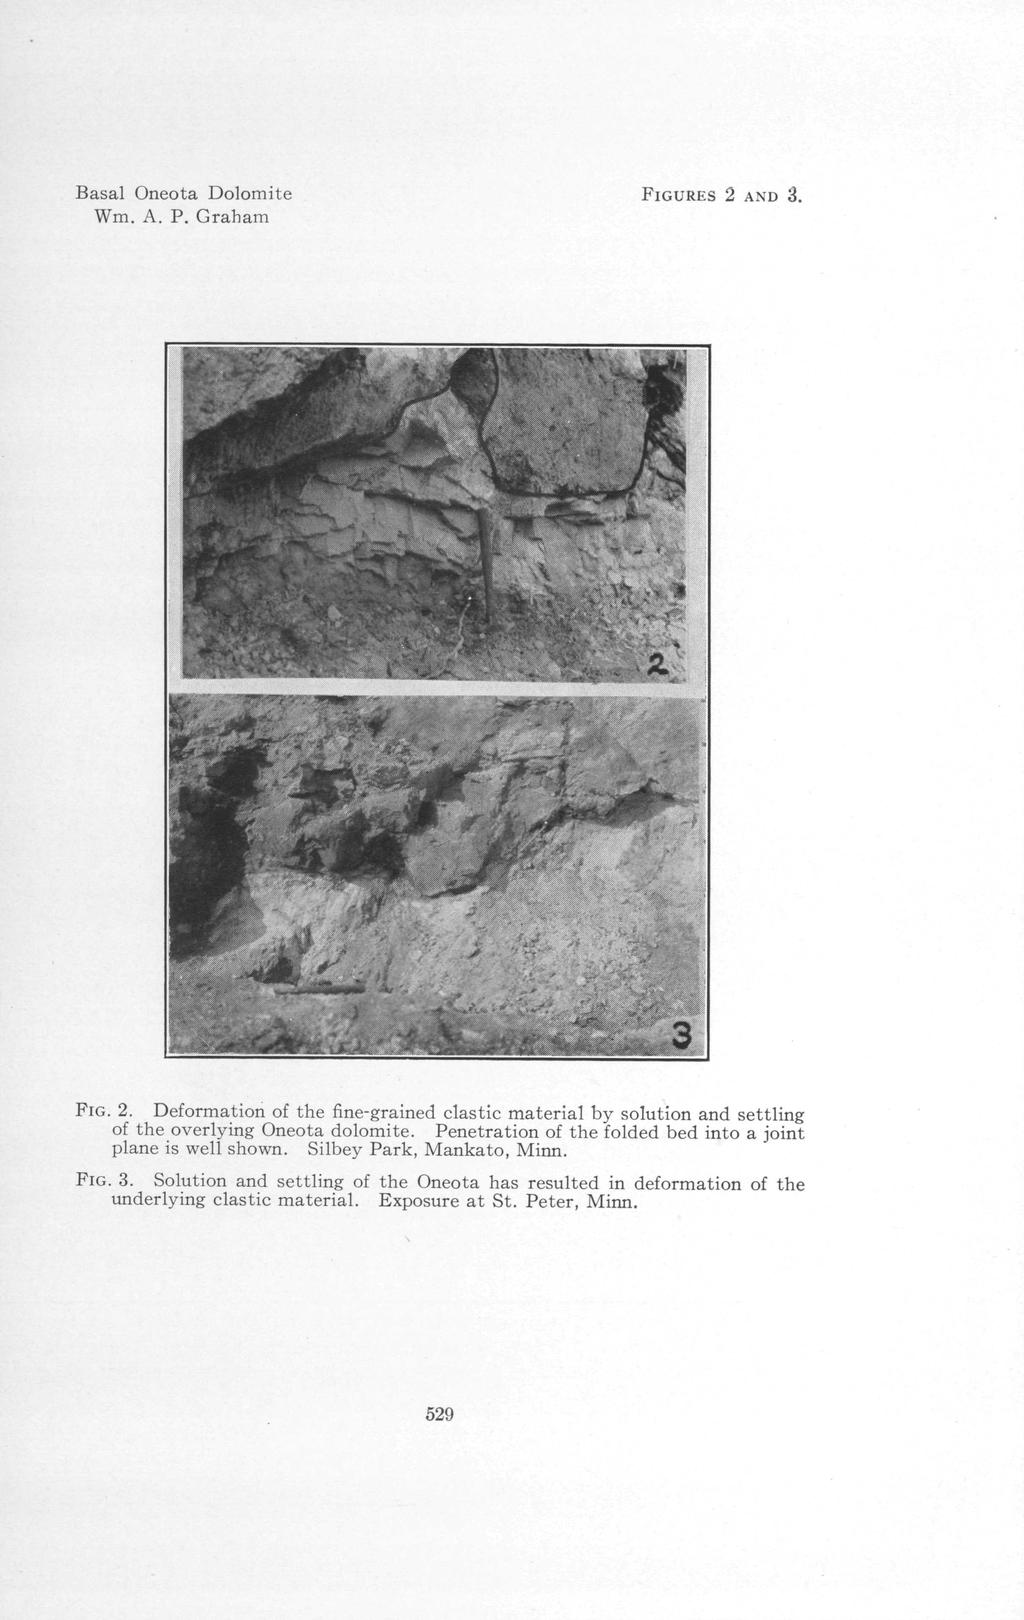 Basal Oneota Dolomite Wm. A. P. Graham FIGURES 2 AND 3. FIG. 2. Deformation of the fine-grained clastic material by solution and settling of the overlying Oneota dolomite.